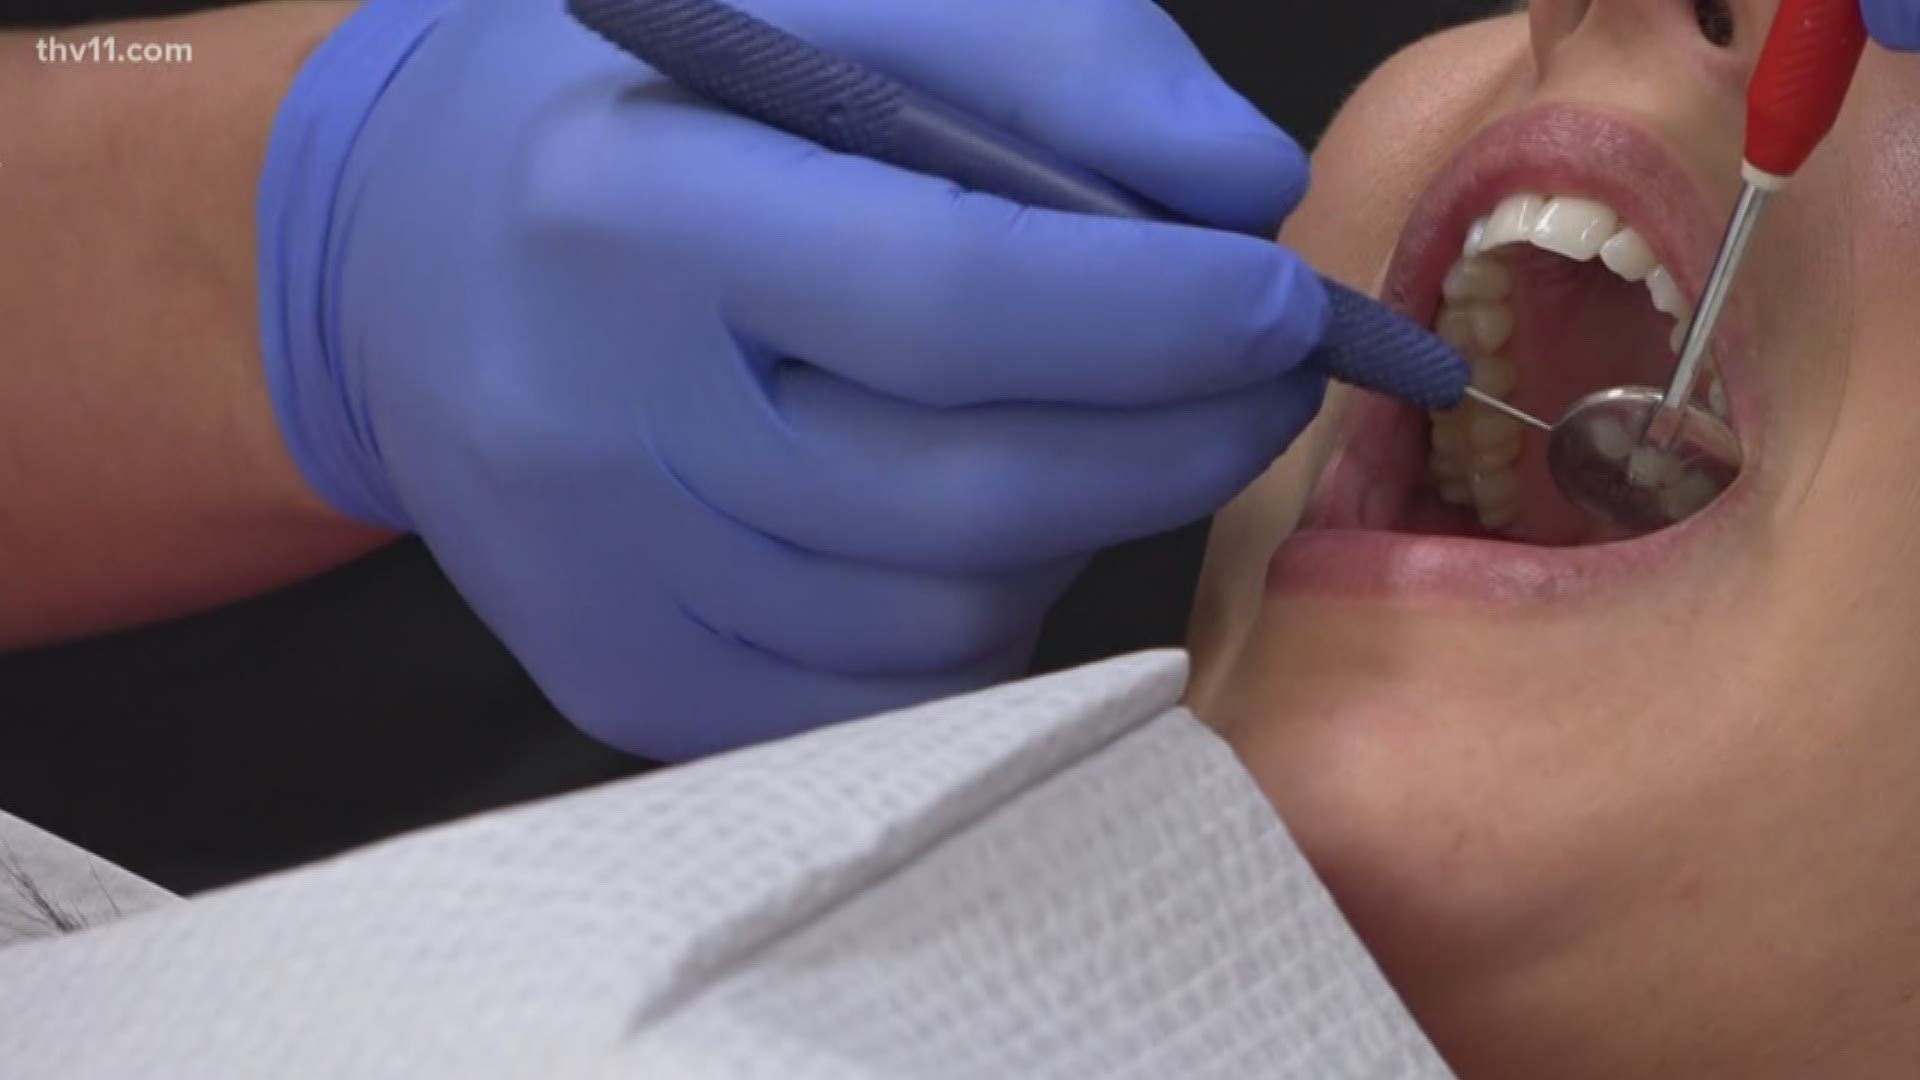 The old saying goes "When you smile, the whole world smiles with you." But what if you're embarrassed about your smile? A local dentist is working to change that offering a new smile at no cost to one deserving veteran.